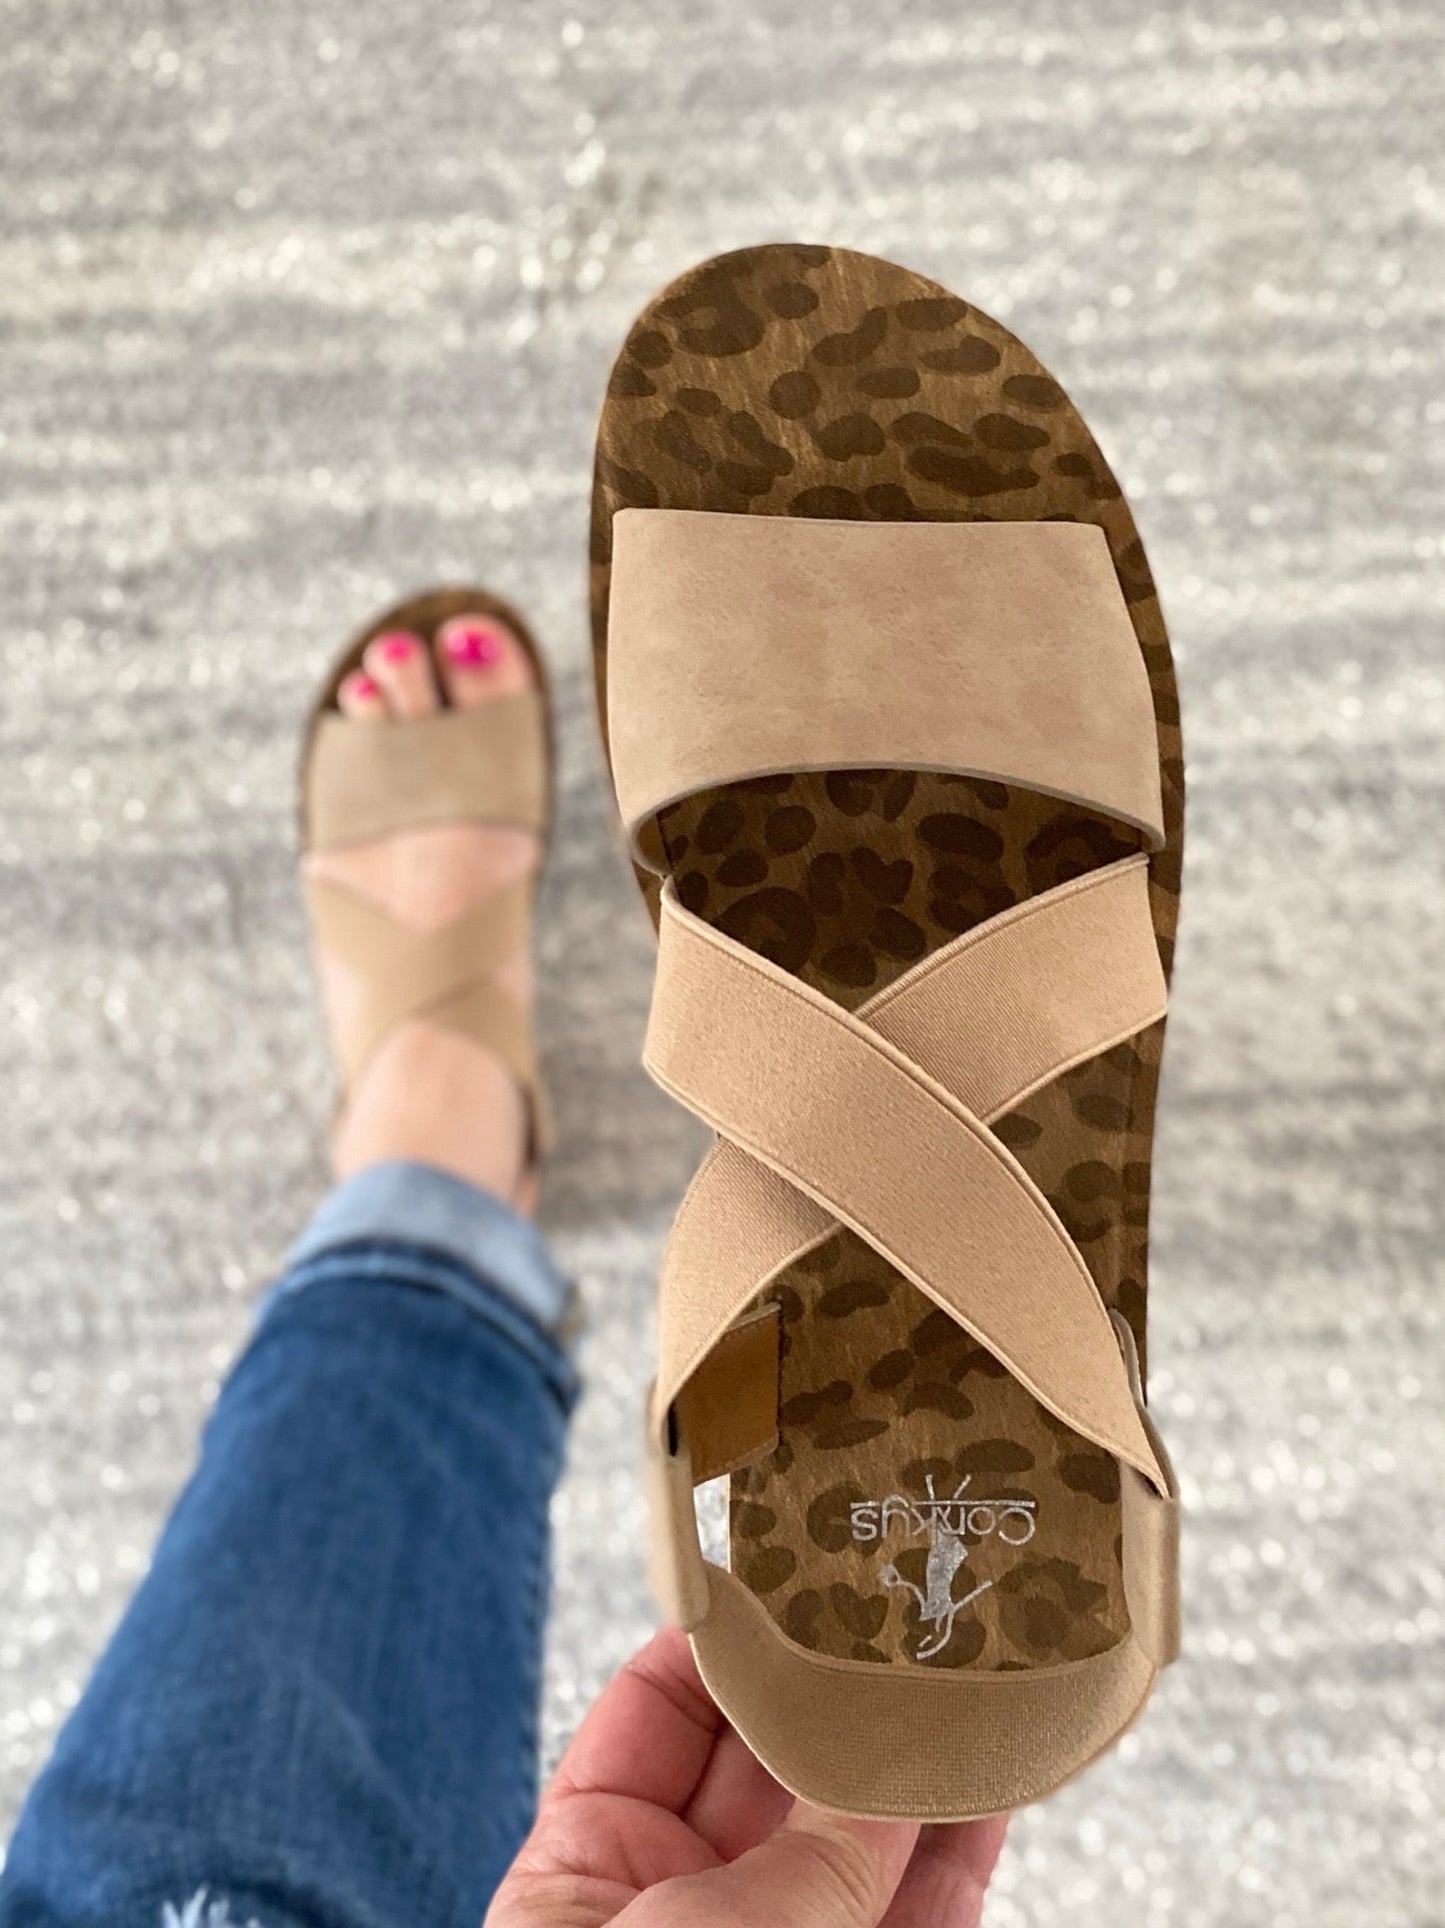 Thrive Sandals in Tan